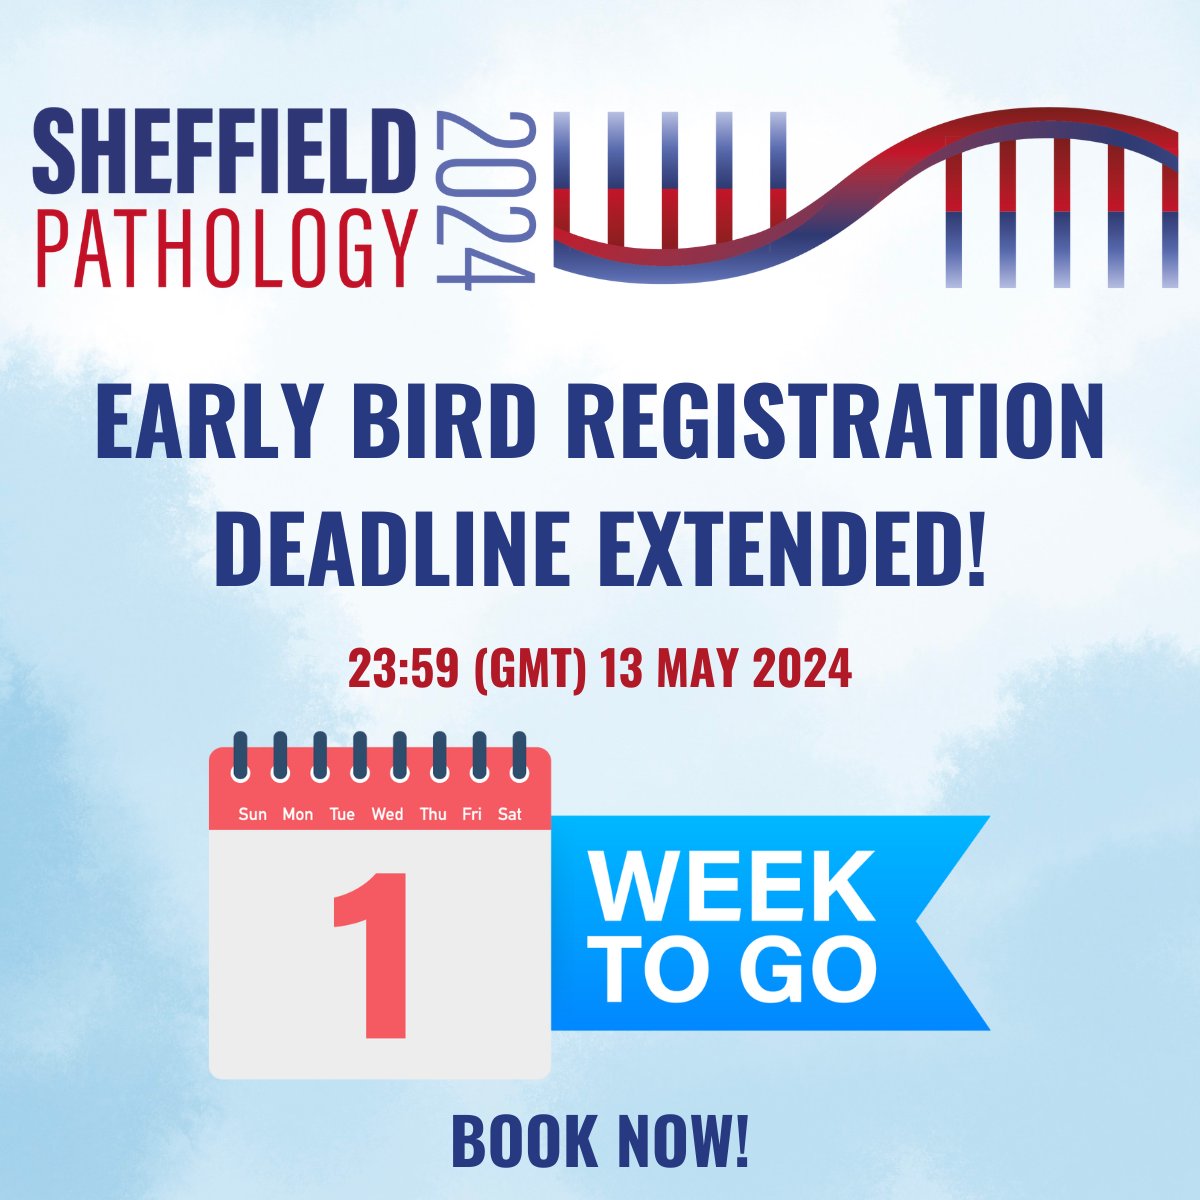 🚨The Early Bird registration deadline for Sheffield Pathology 2024 has been extended until 13/05!🧬 If you haven't already secured your place, follow this link to register: sheffieldpathology.co.uk/registration